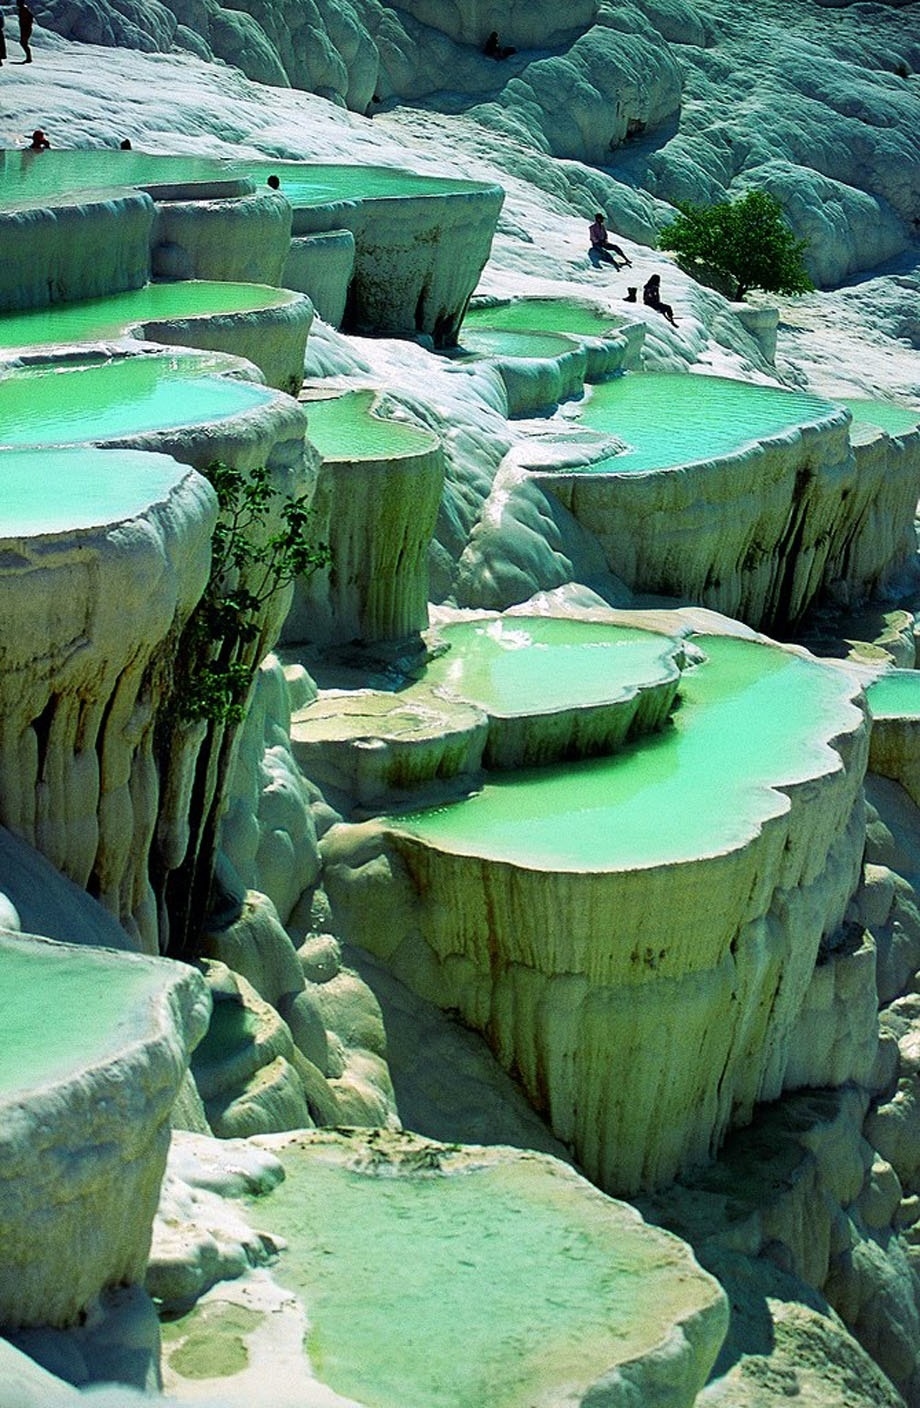 In a natural rock pool in Pamukkale, Turkey